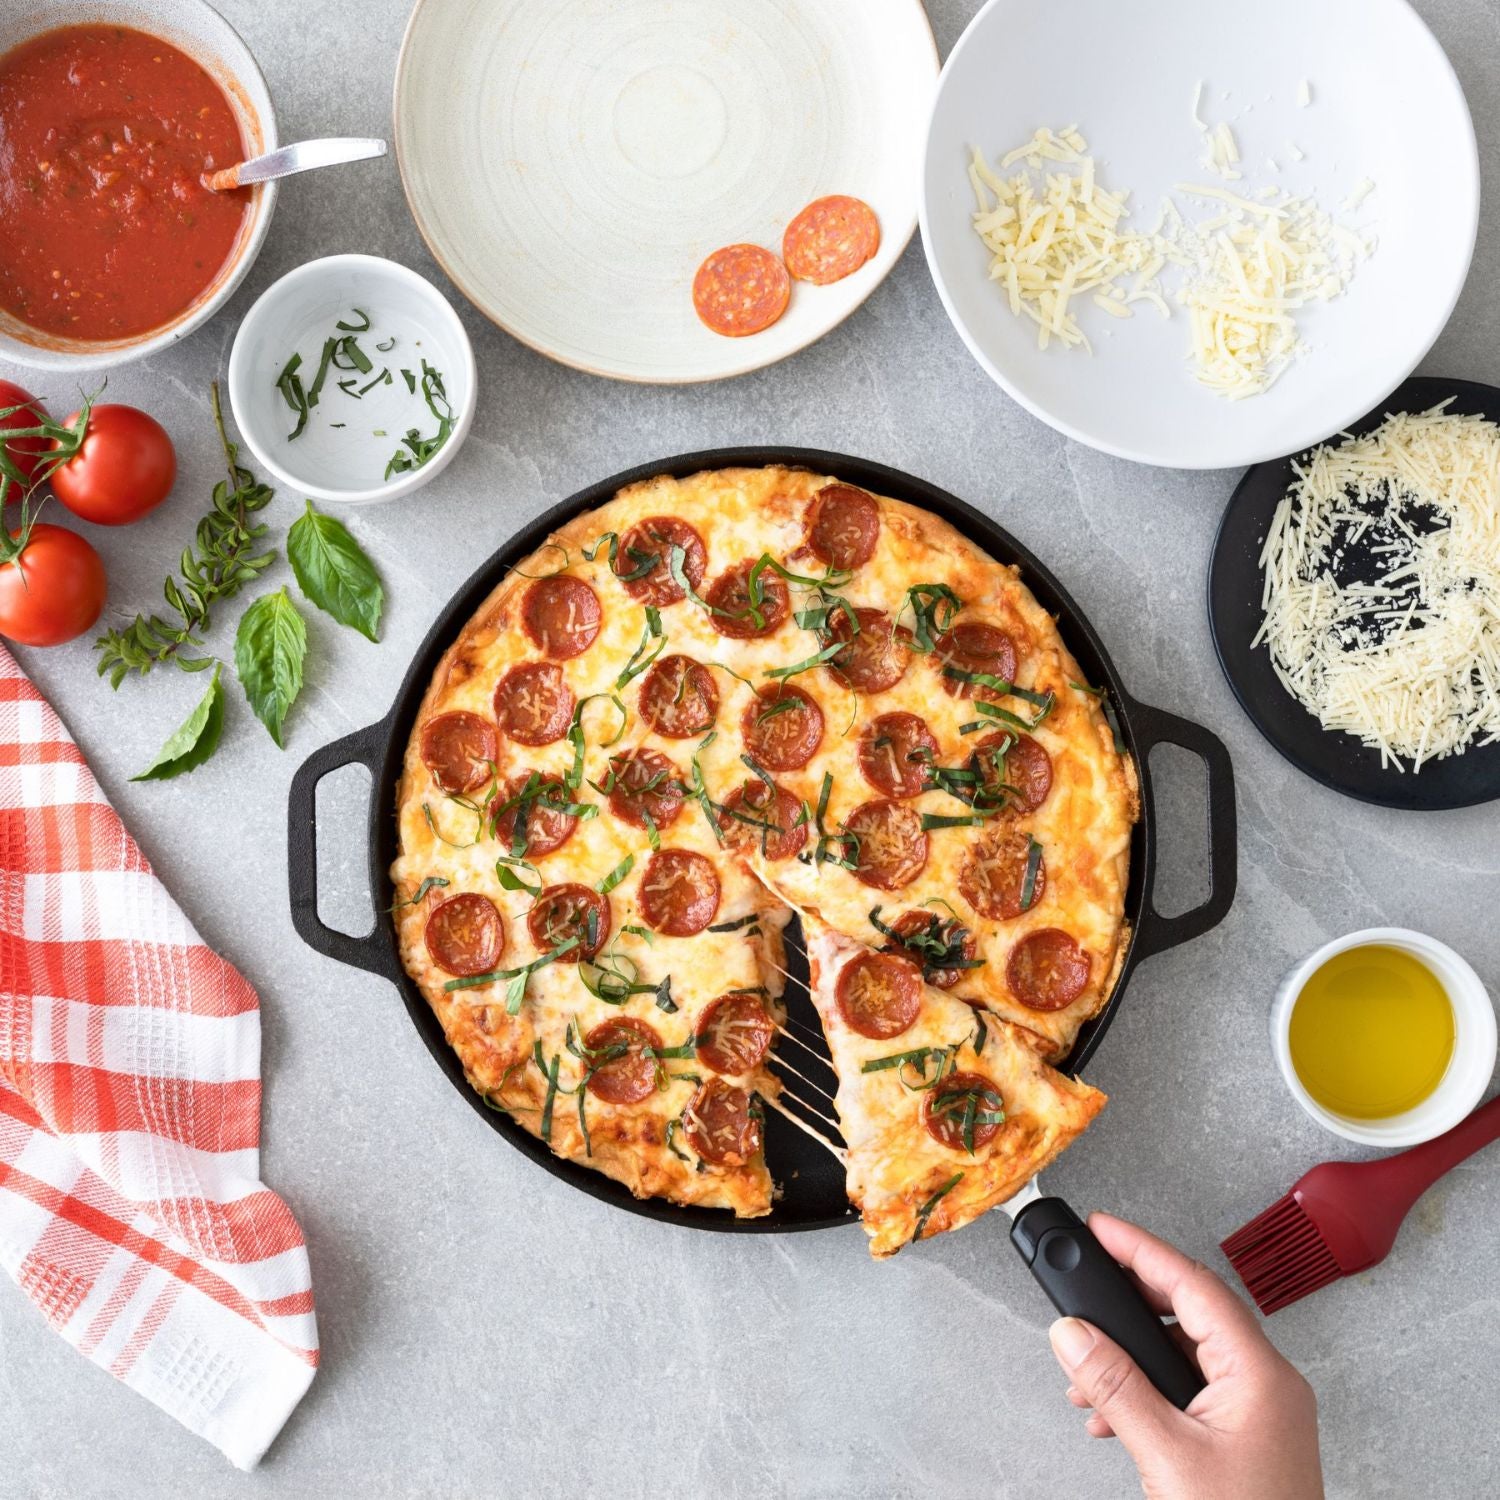 Chef Pomodoro Cast Iron Pizza Pan, 12 Inch Pre-Seasoned Skillet, with  Handles, Baking Pan, 1 - Gerbes Super Markets